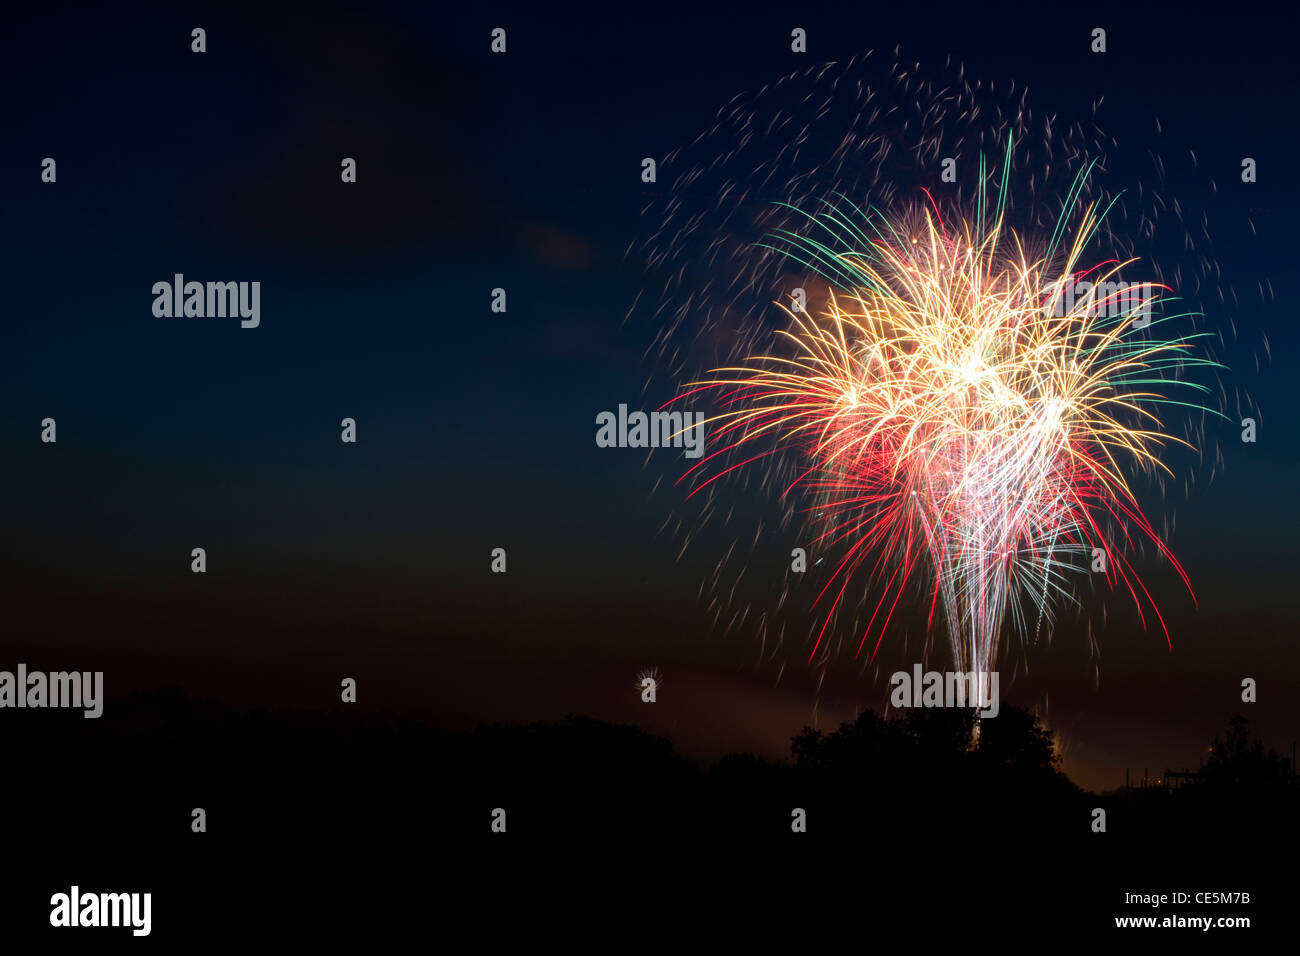 Fourth of July fireworks display in Boise, Idaho, USA. Stock Photo